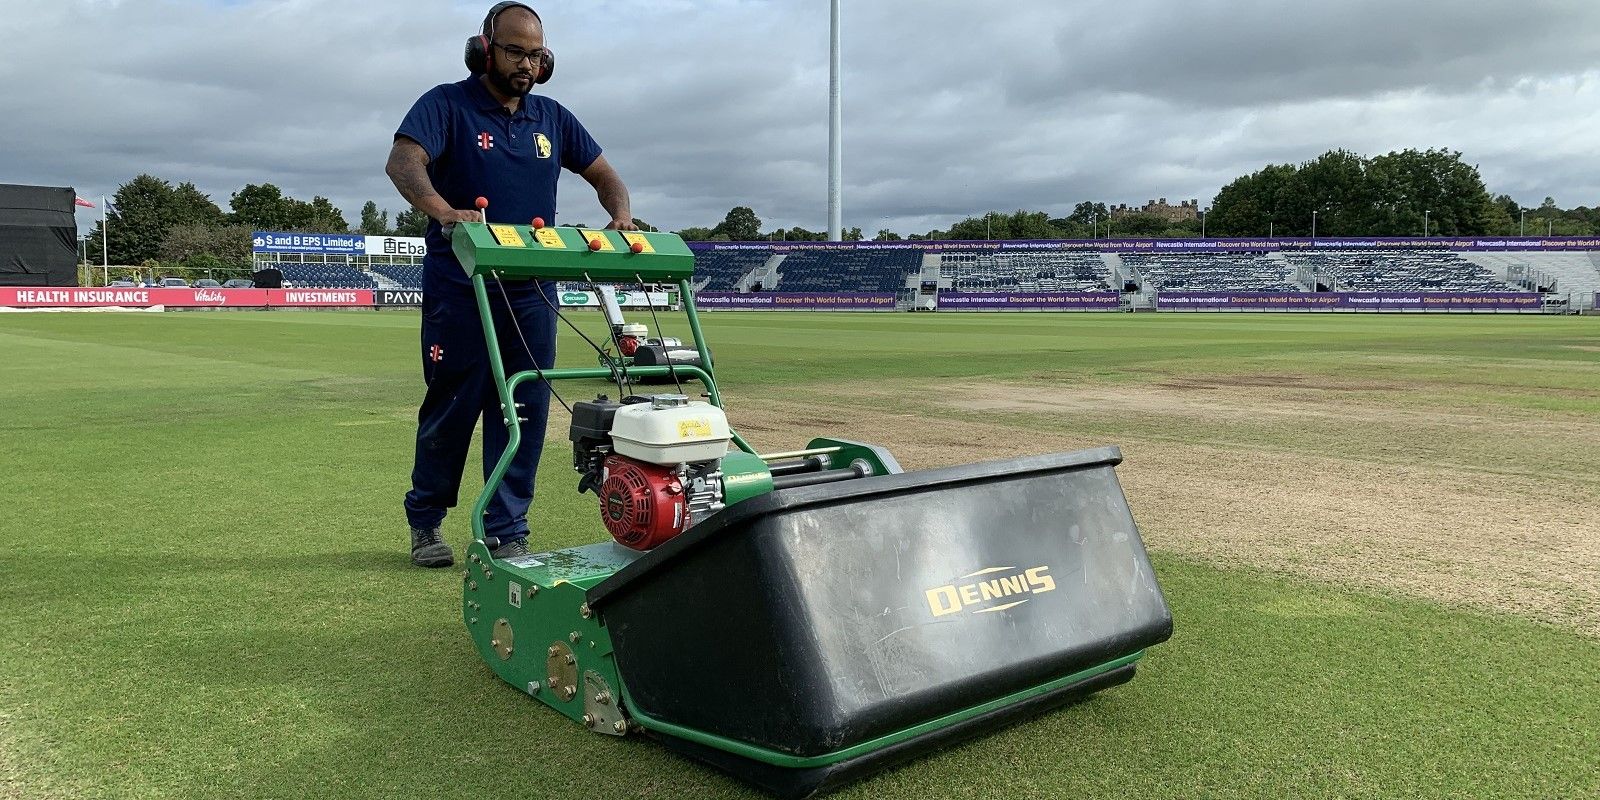 Video - Preparing-the-cricket-square-at-the-Emirates-Riverside-with-the-Dennis-G34D-cylinder-mower